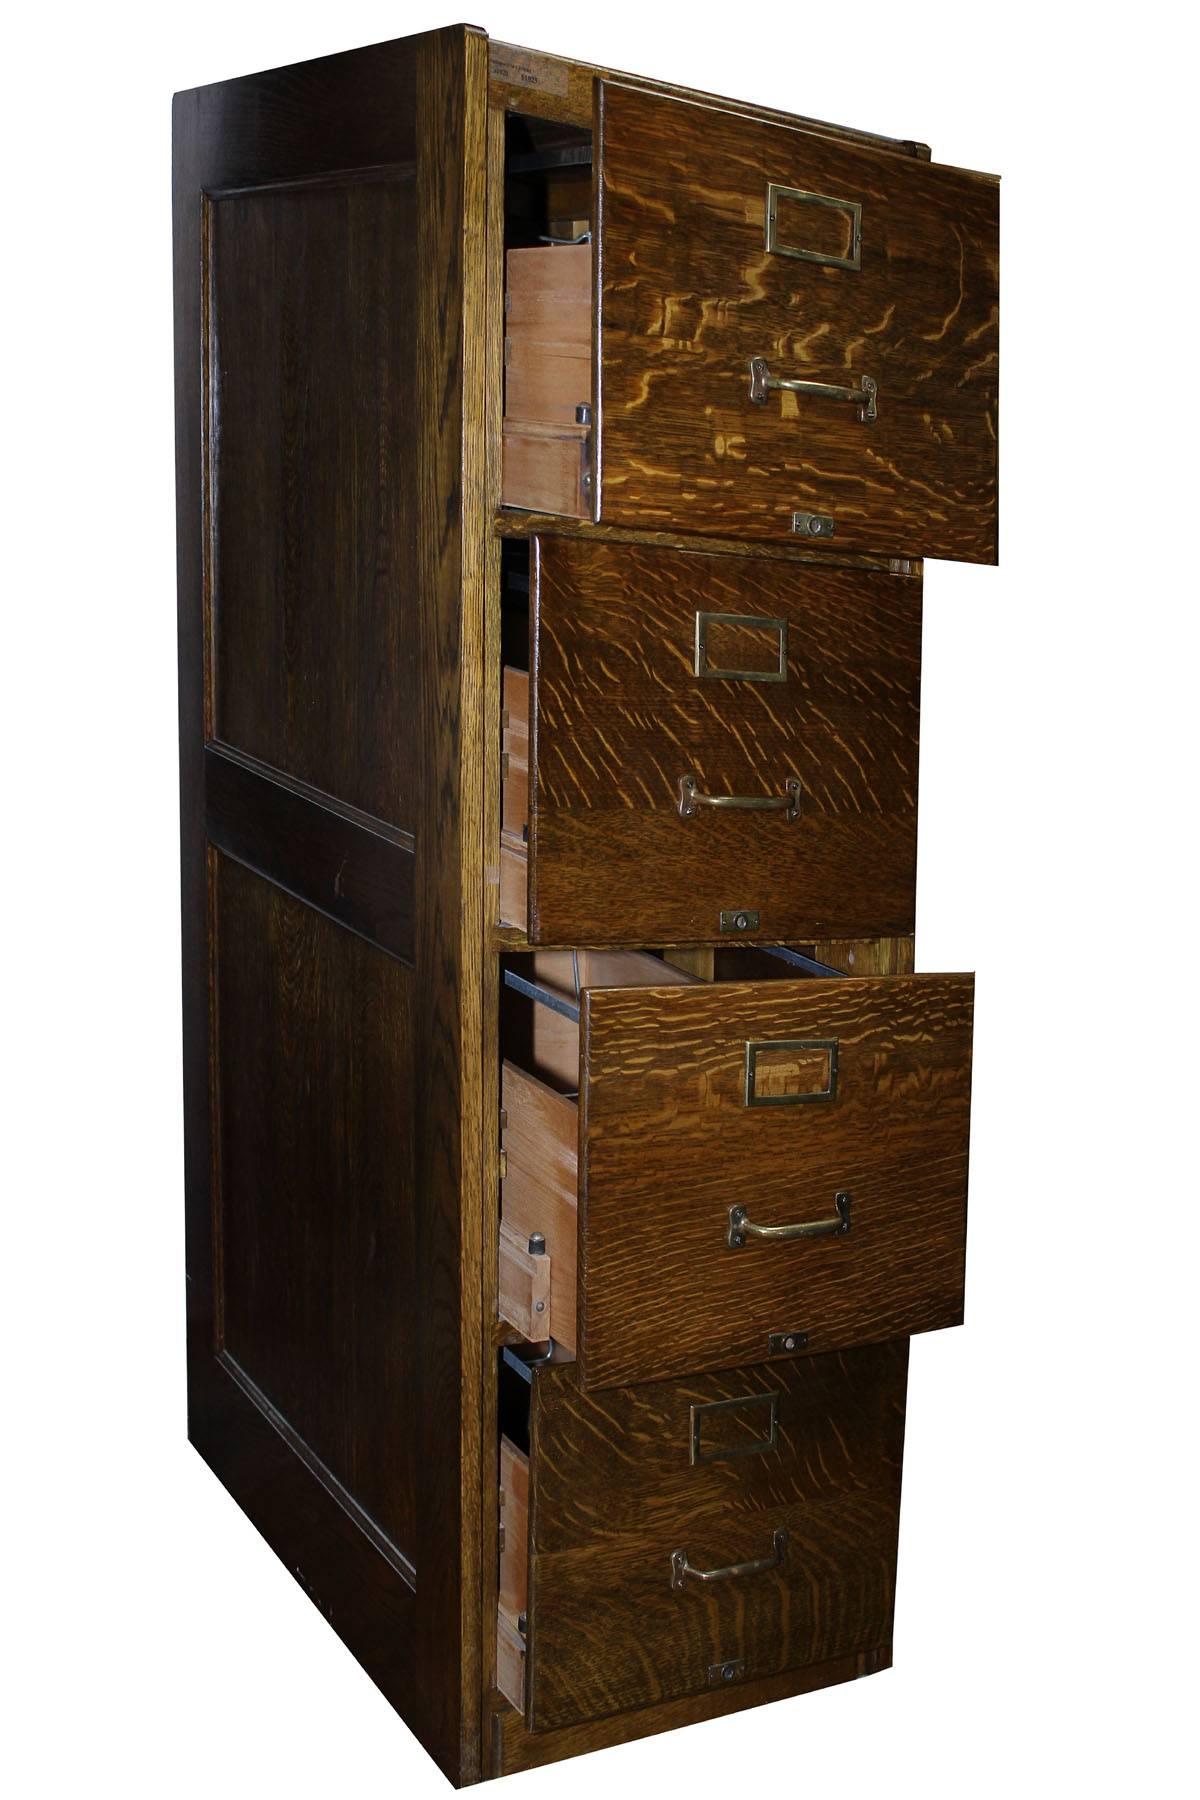 Impeccable quarter sawn oak filing cabinet with brass trim. Four large draws for full size files. This is old school class, an elegant way to store files. Each drawer has a metal frame for contemporary hanging files. The cabinet is finished in